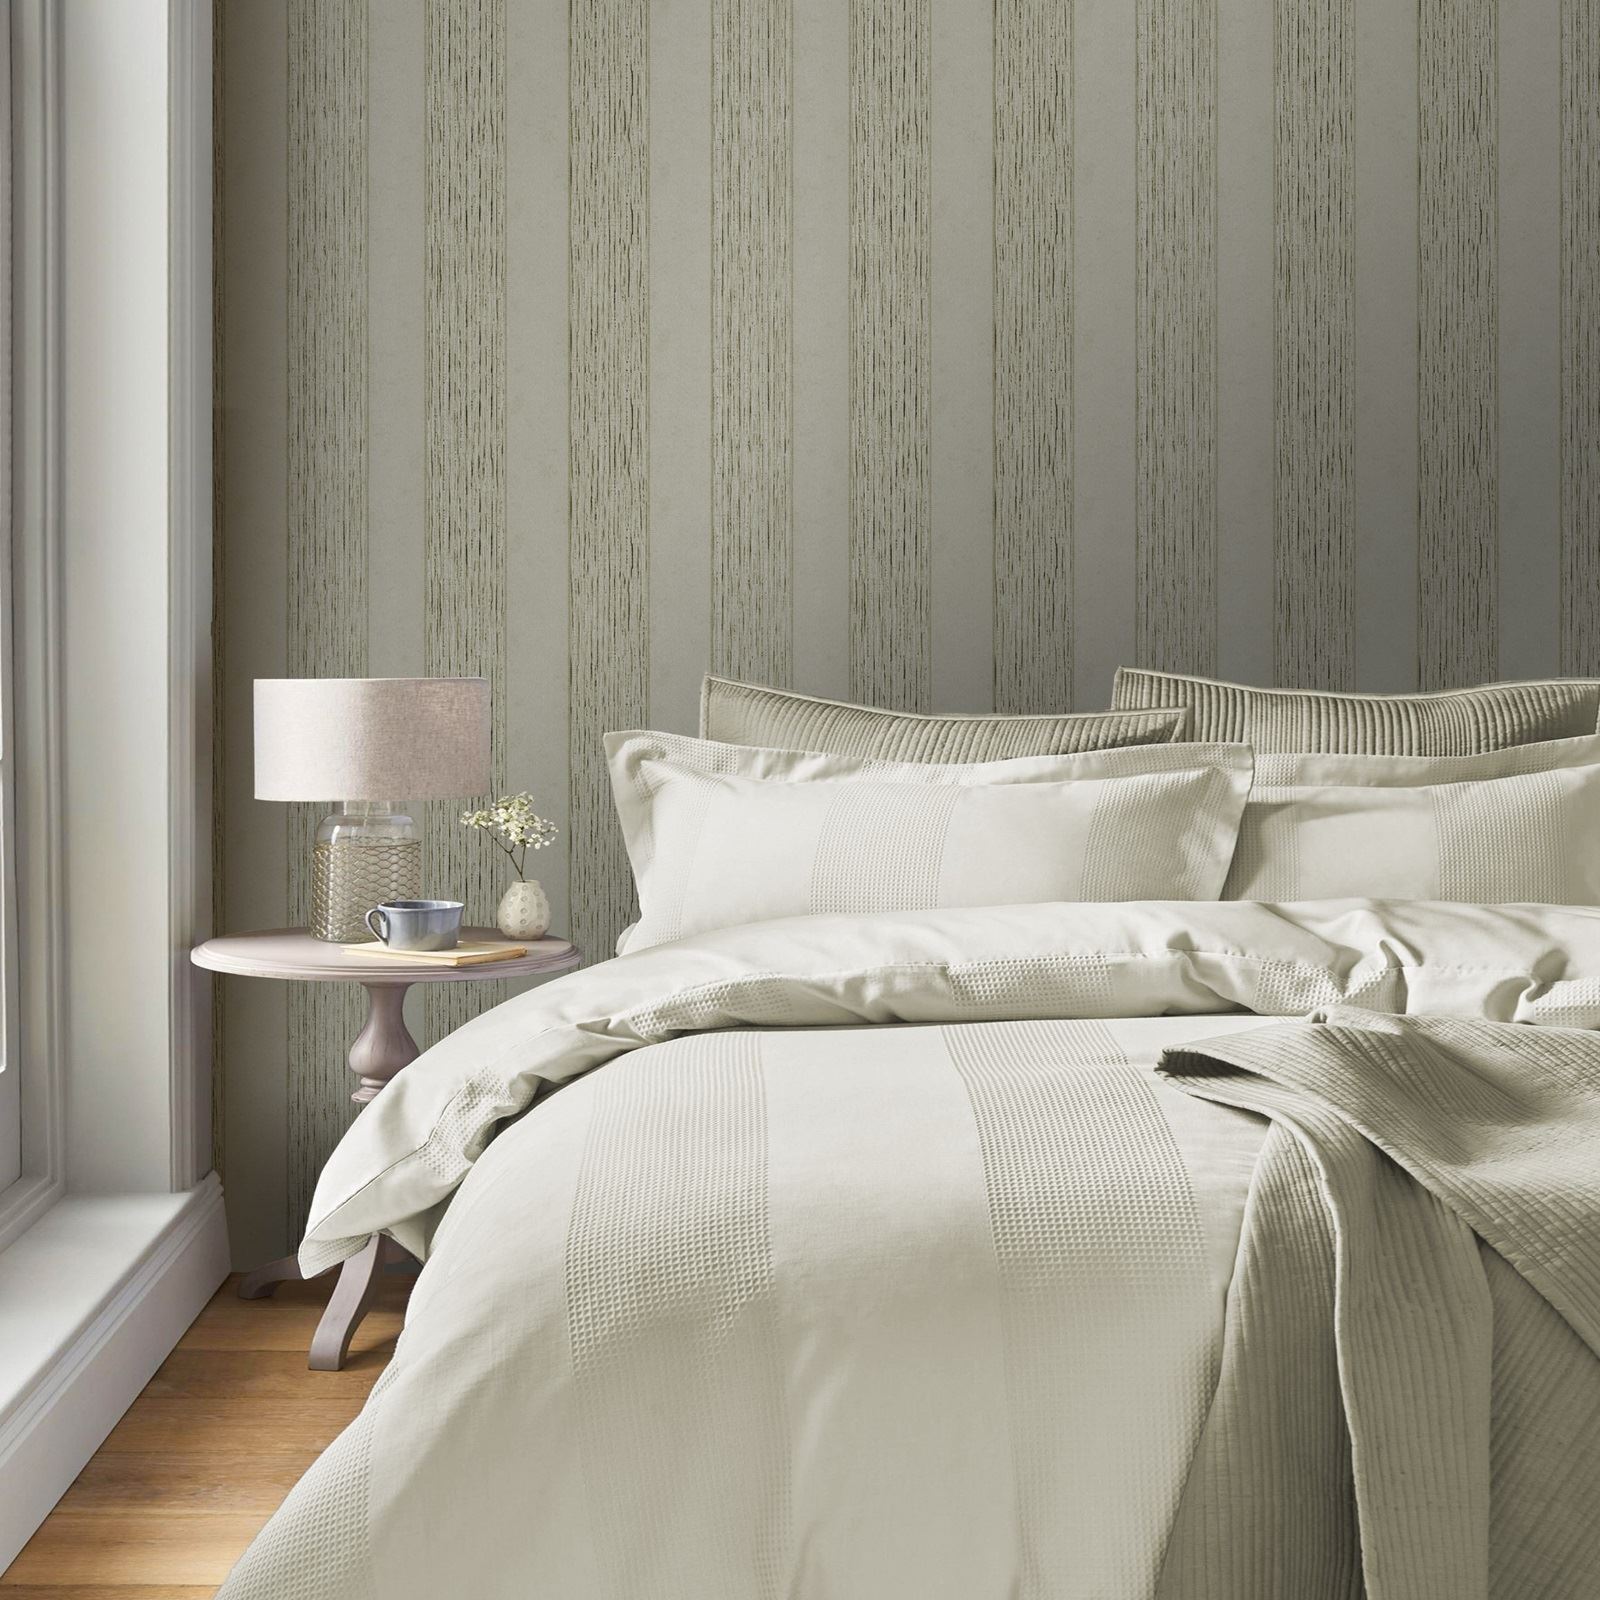 thick textured wallpaper,bedroom,bed sheet,bed,bedding,furniture